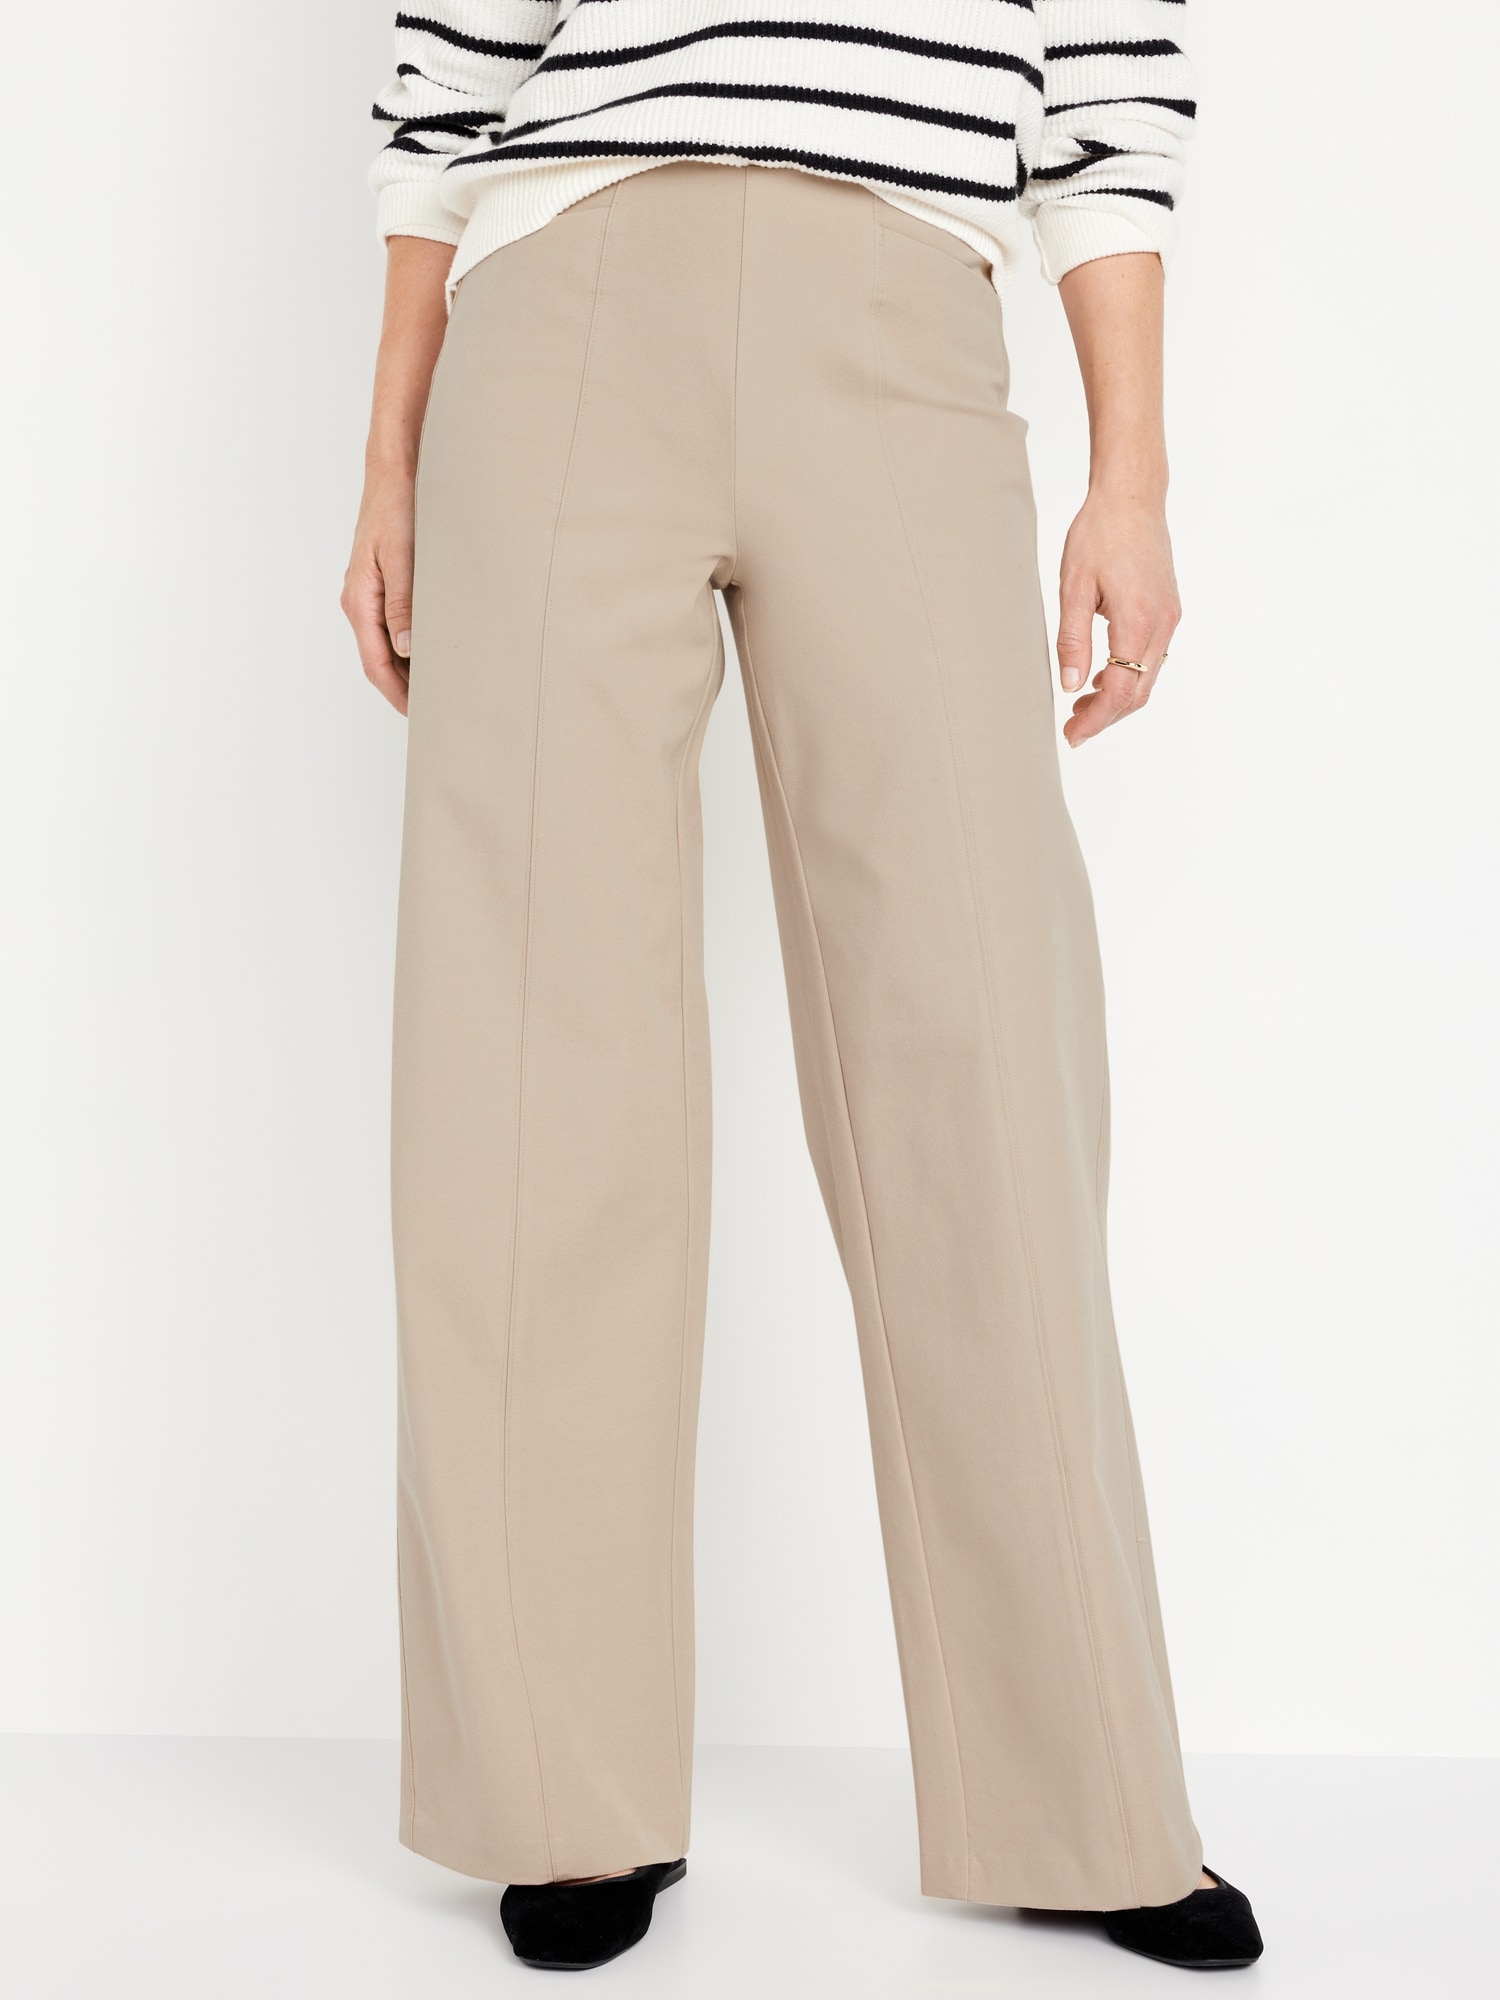 Champagne high waisted pleated essential Women Dress Pants | Sumissura